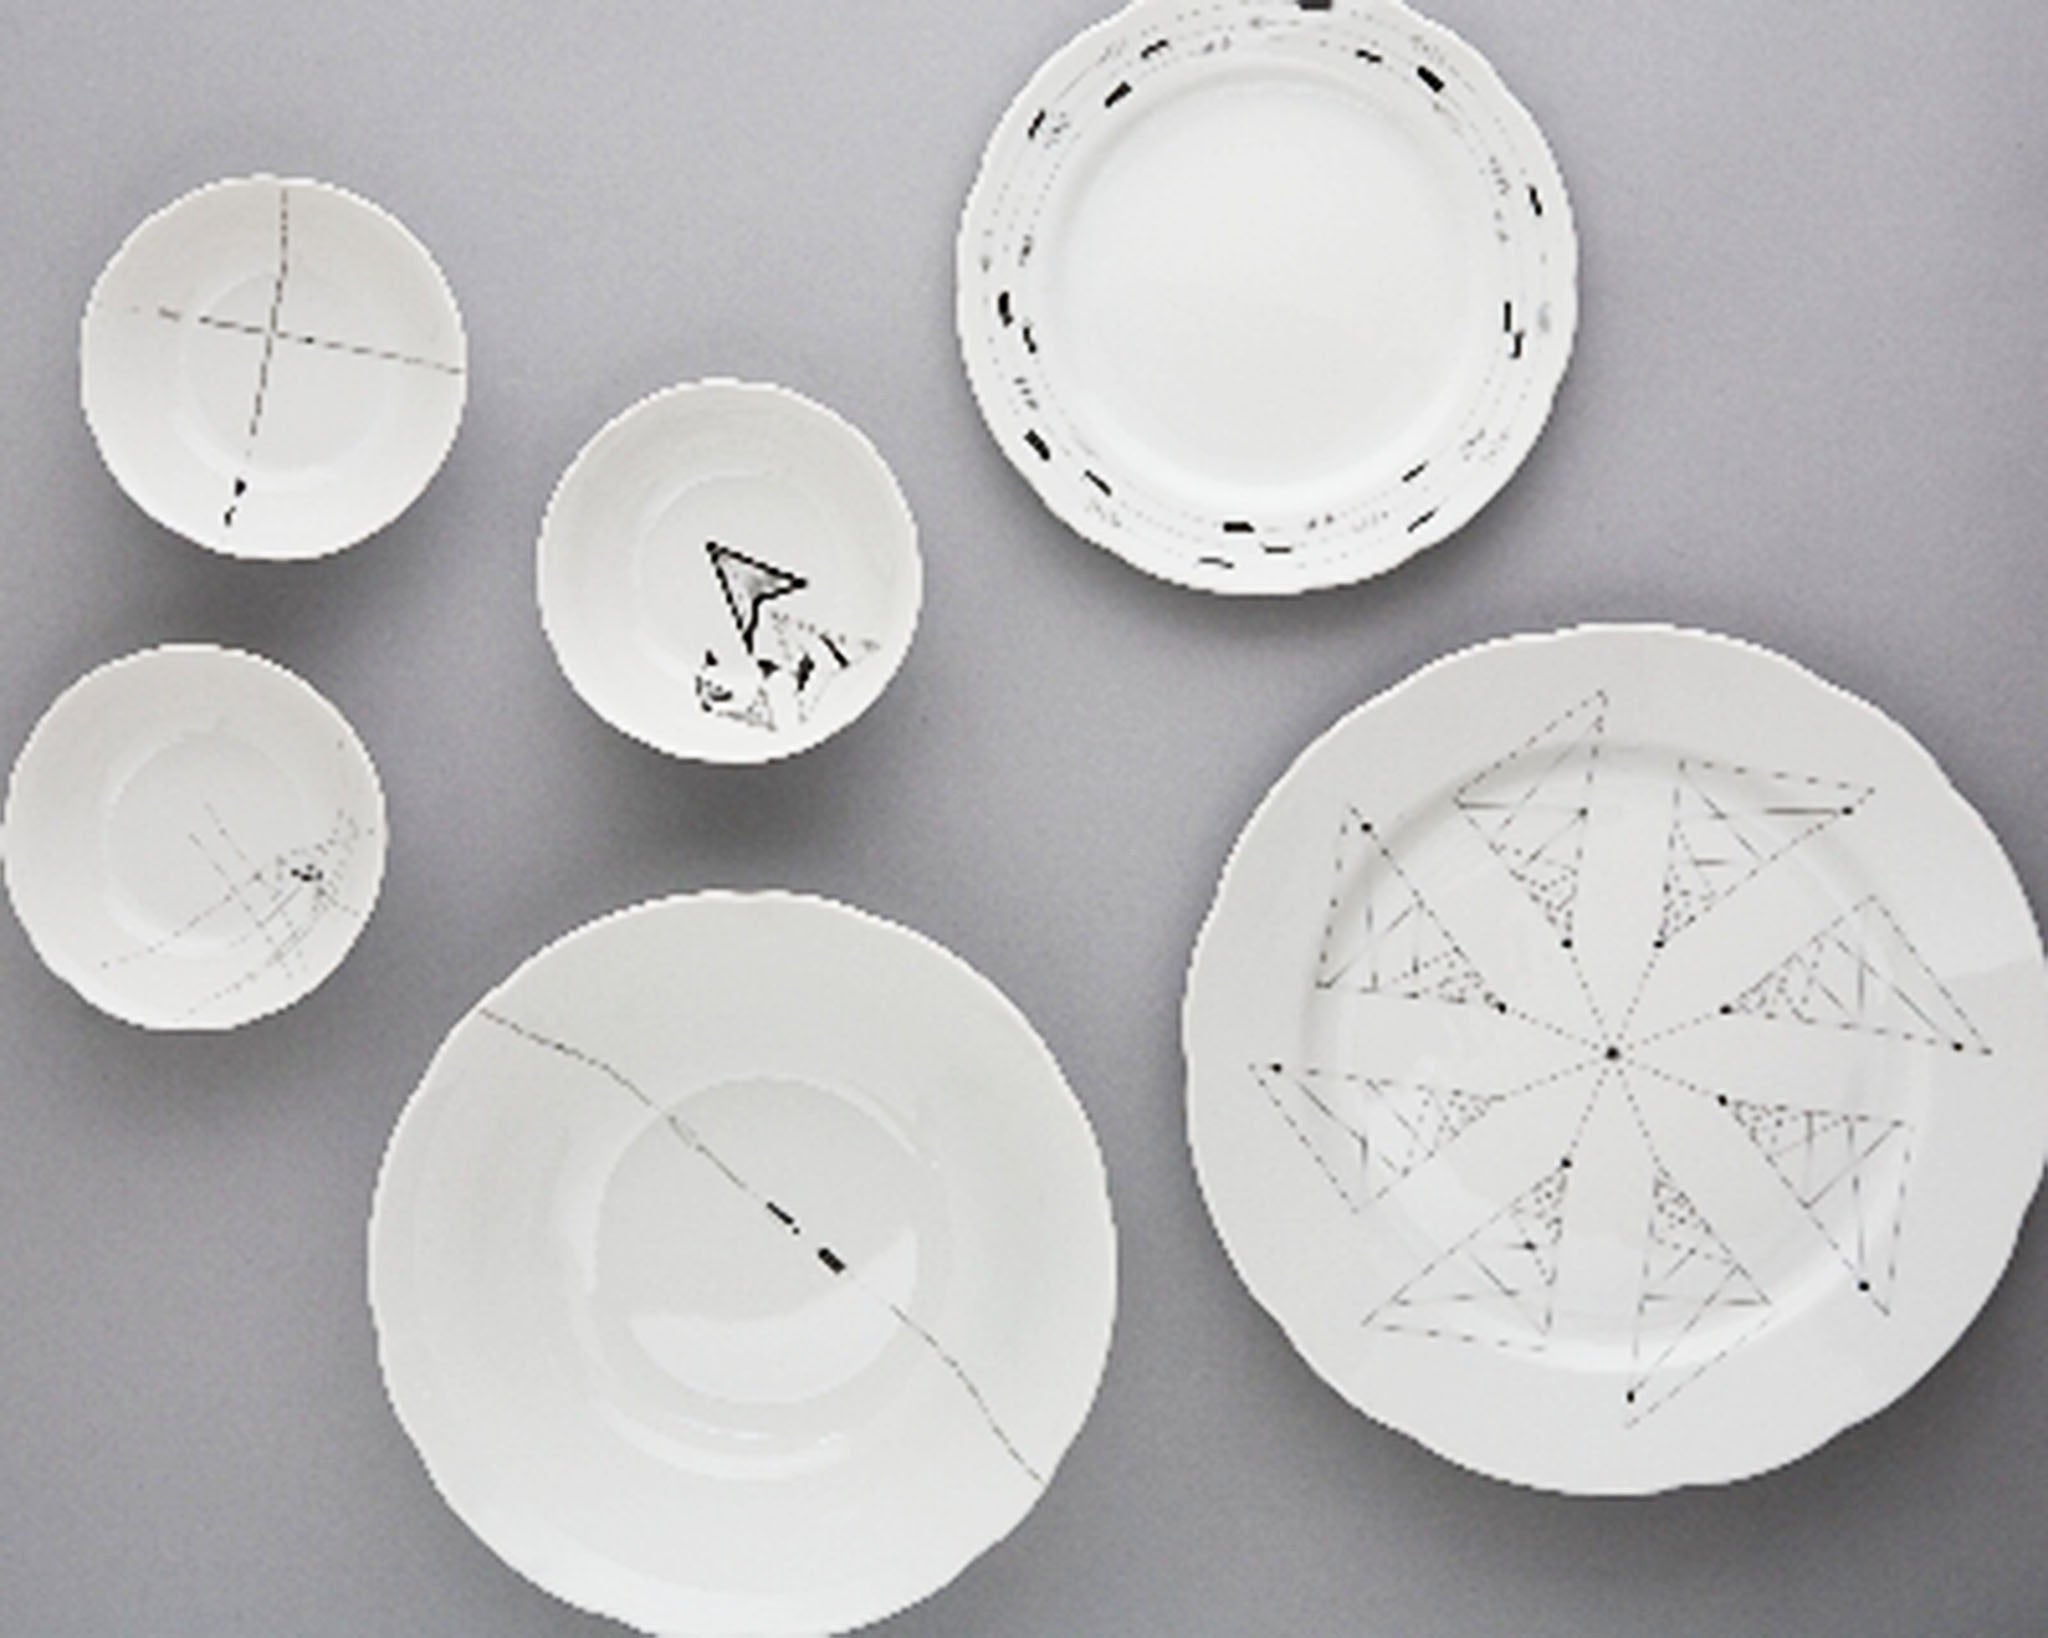 Designed by Colene Blanchet and Annie Lenon, Saetta dishware collection is inspired by maps, paths, geometry, space and lightning. 